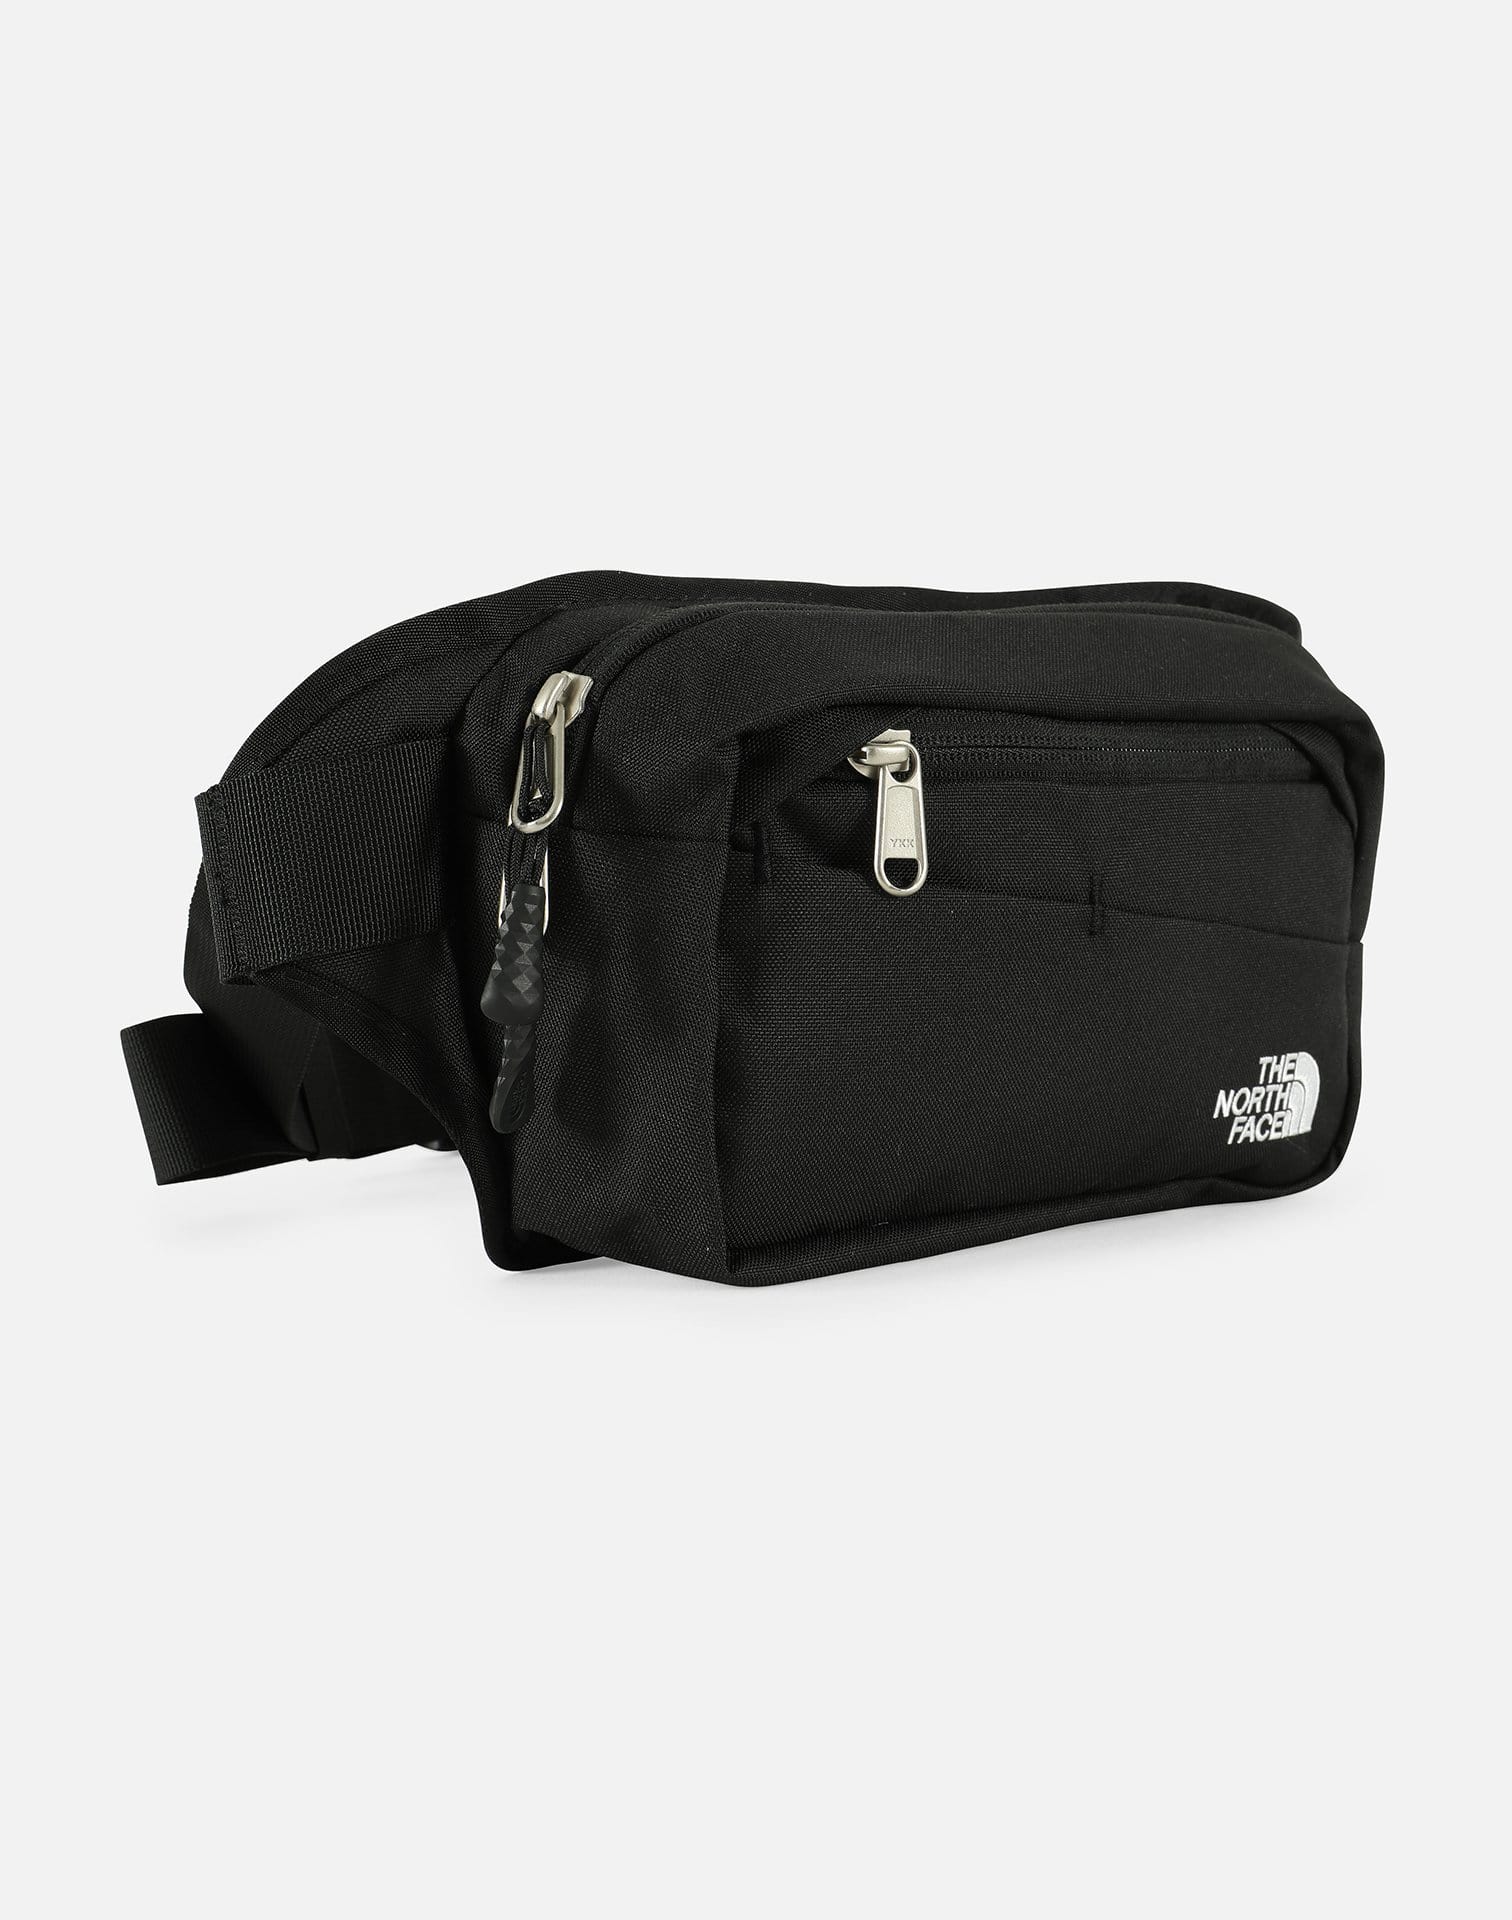 The North Face Bozer Hip Pack